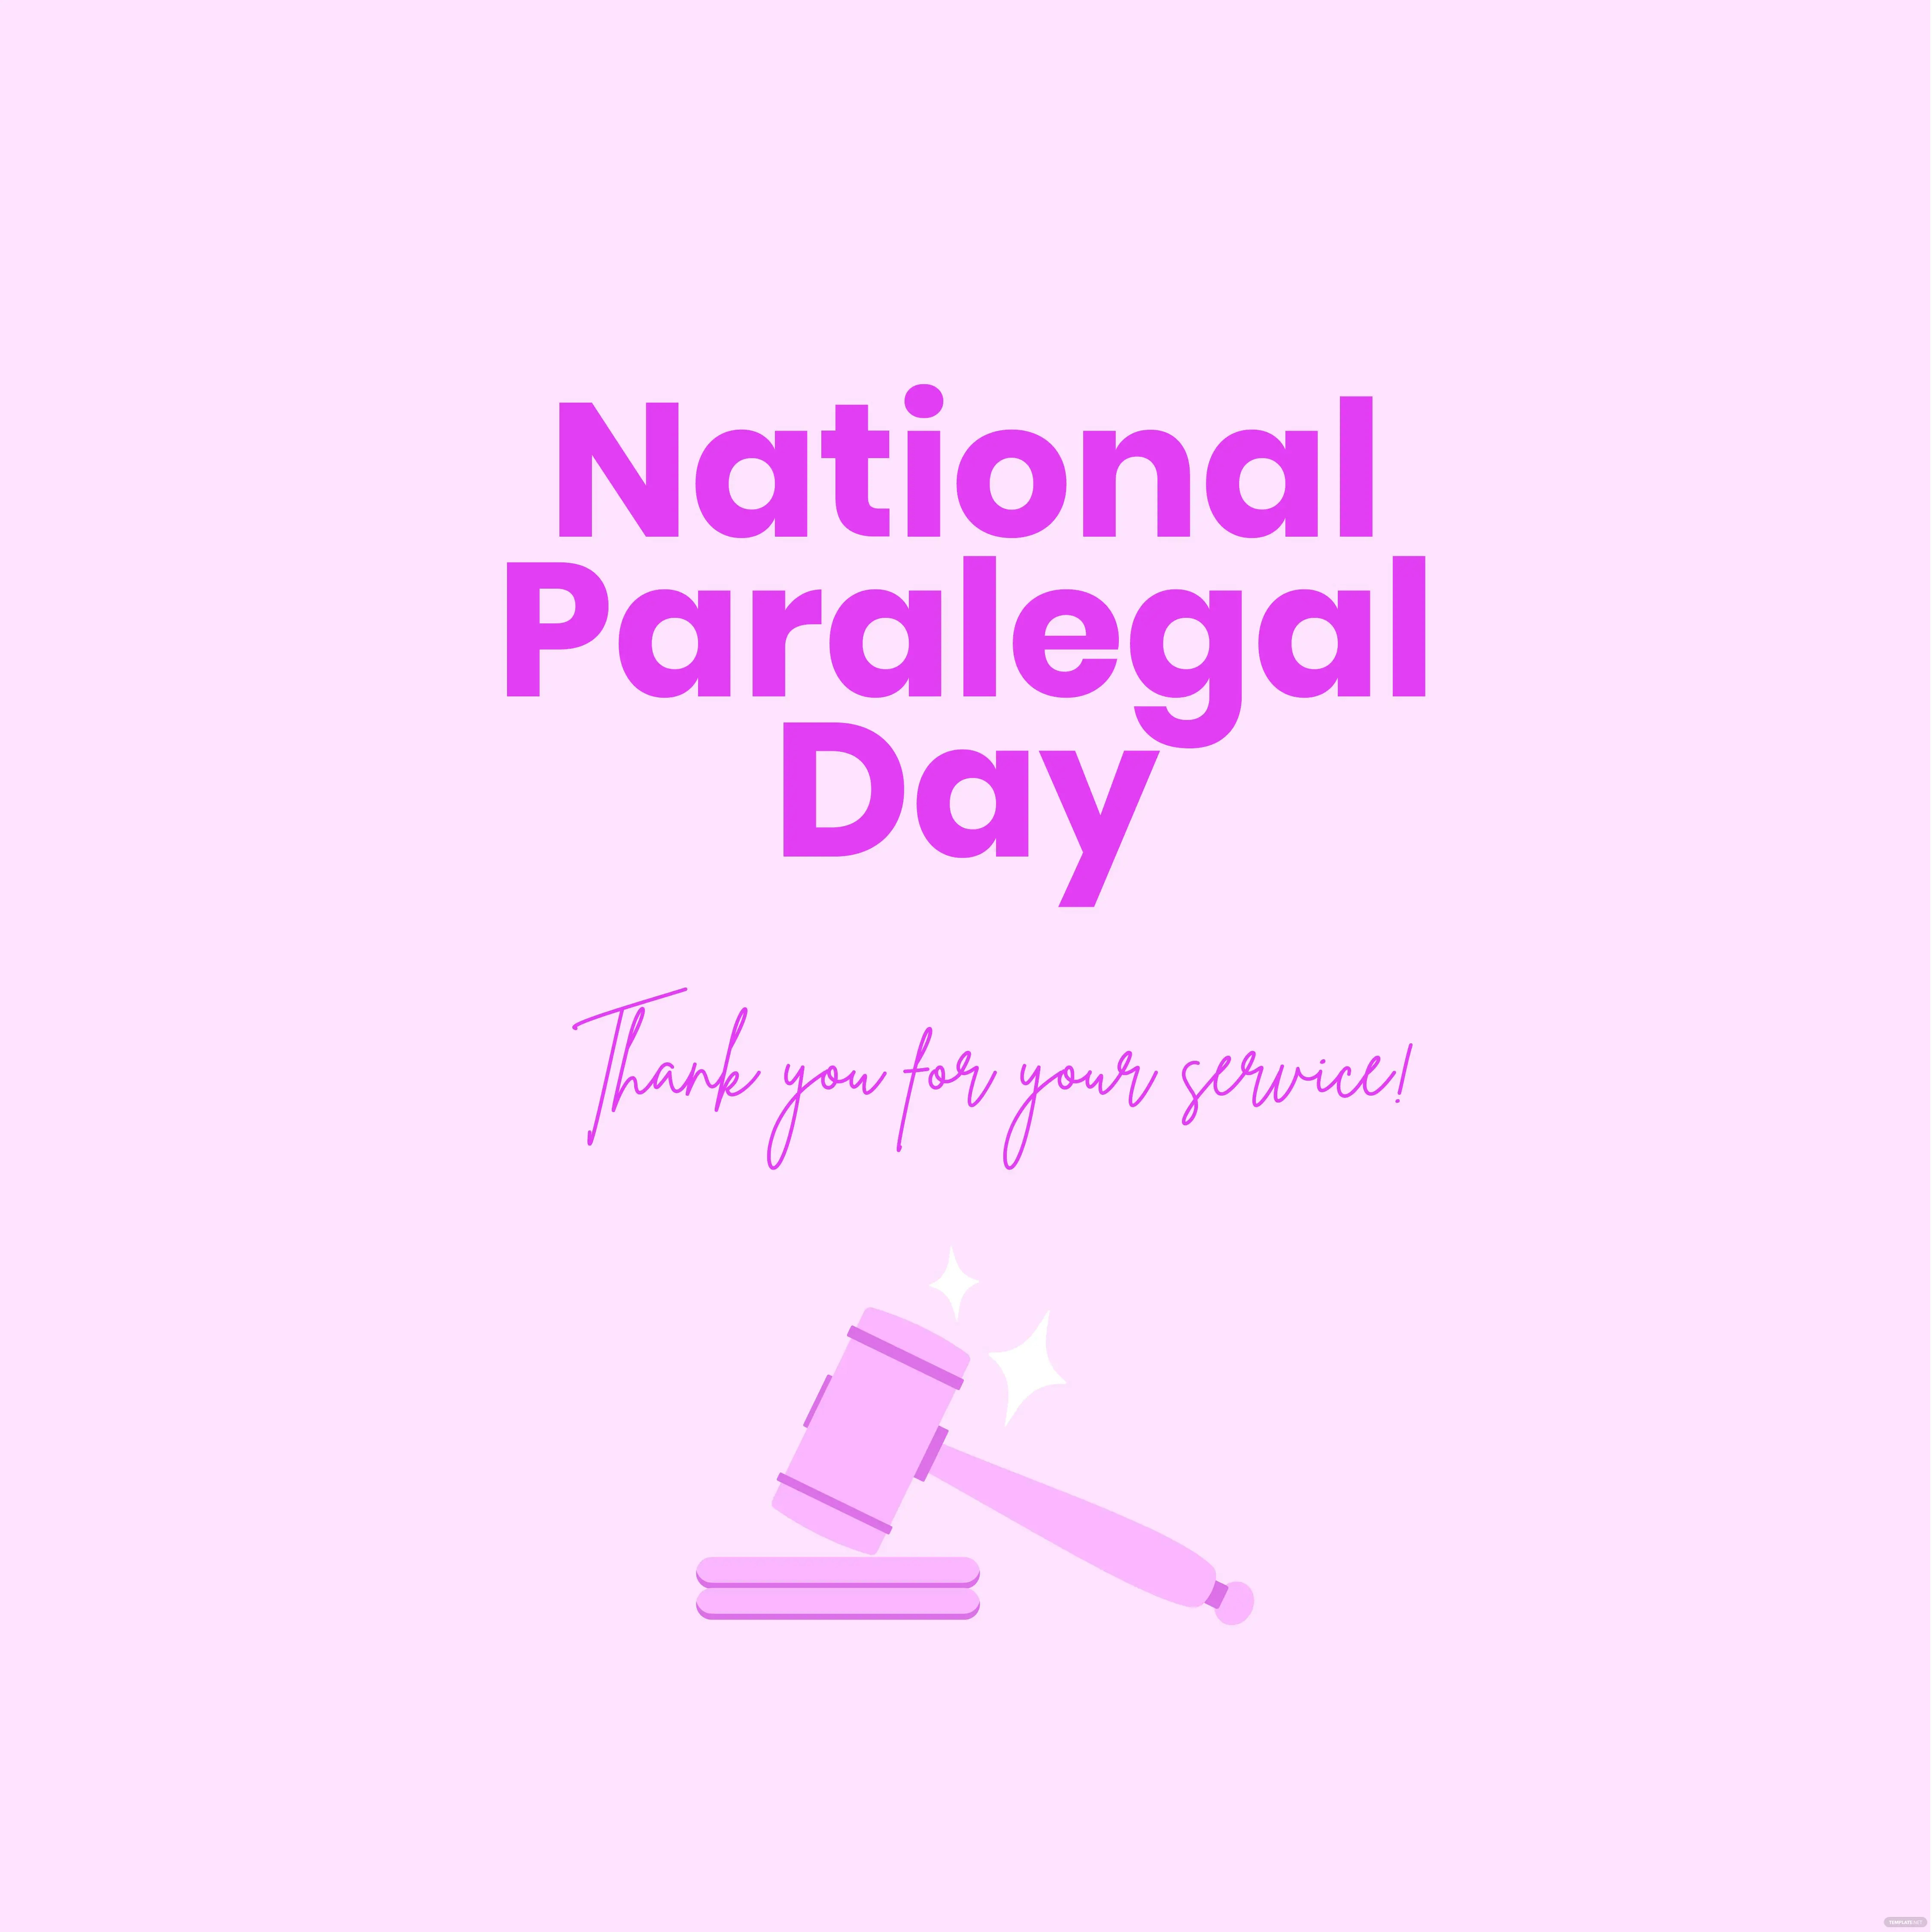 National Paralegal Day When Is National Paralegal Day? Meaning, Dates